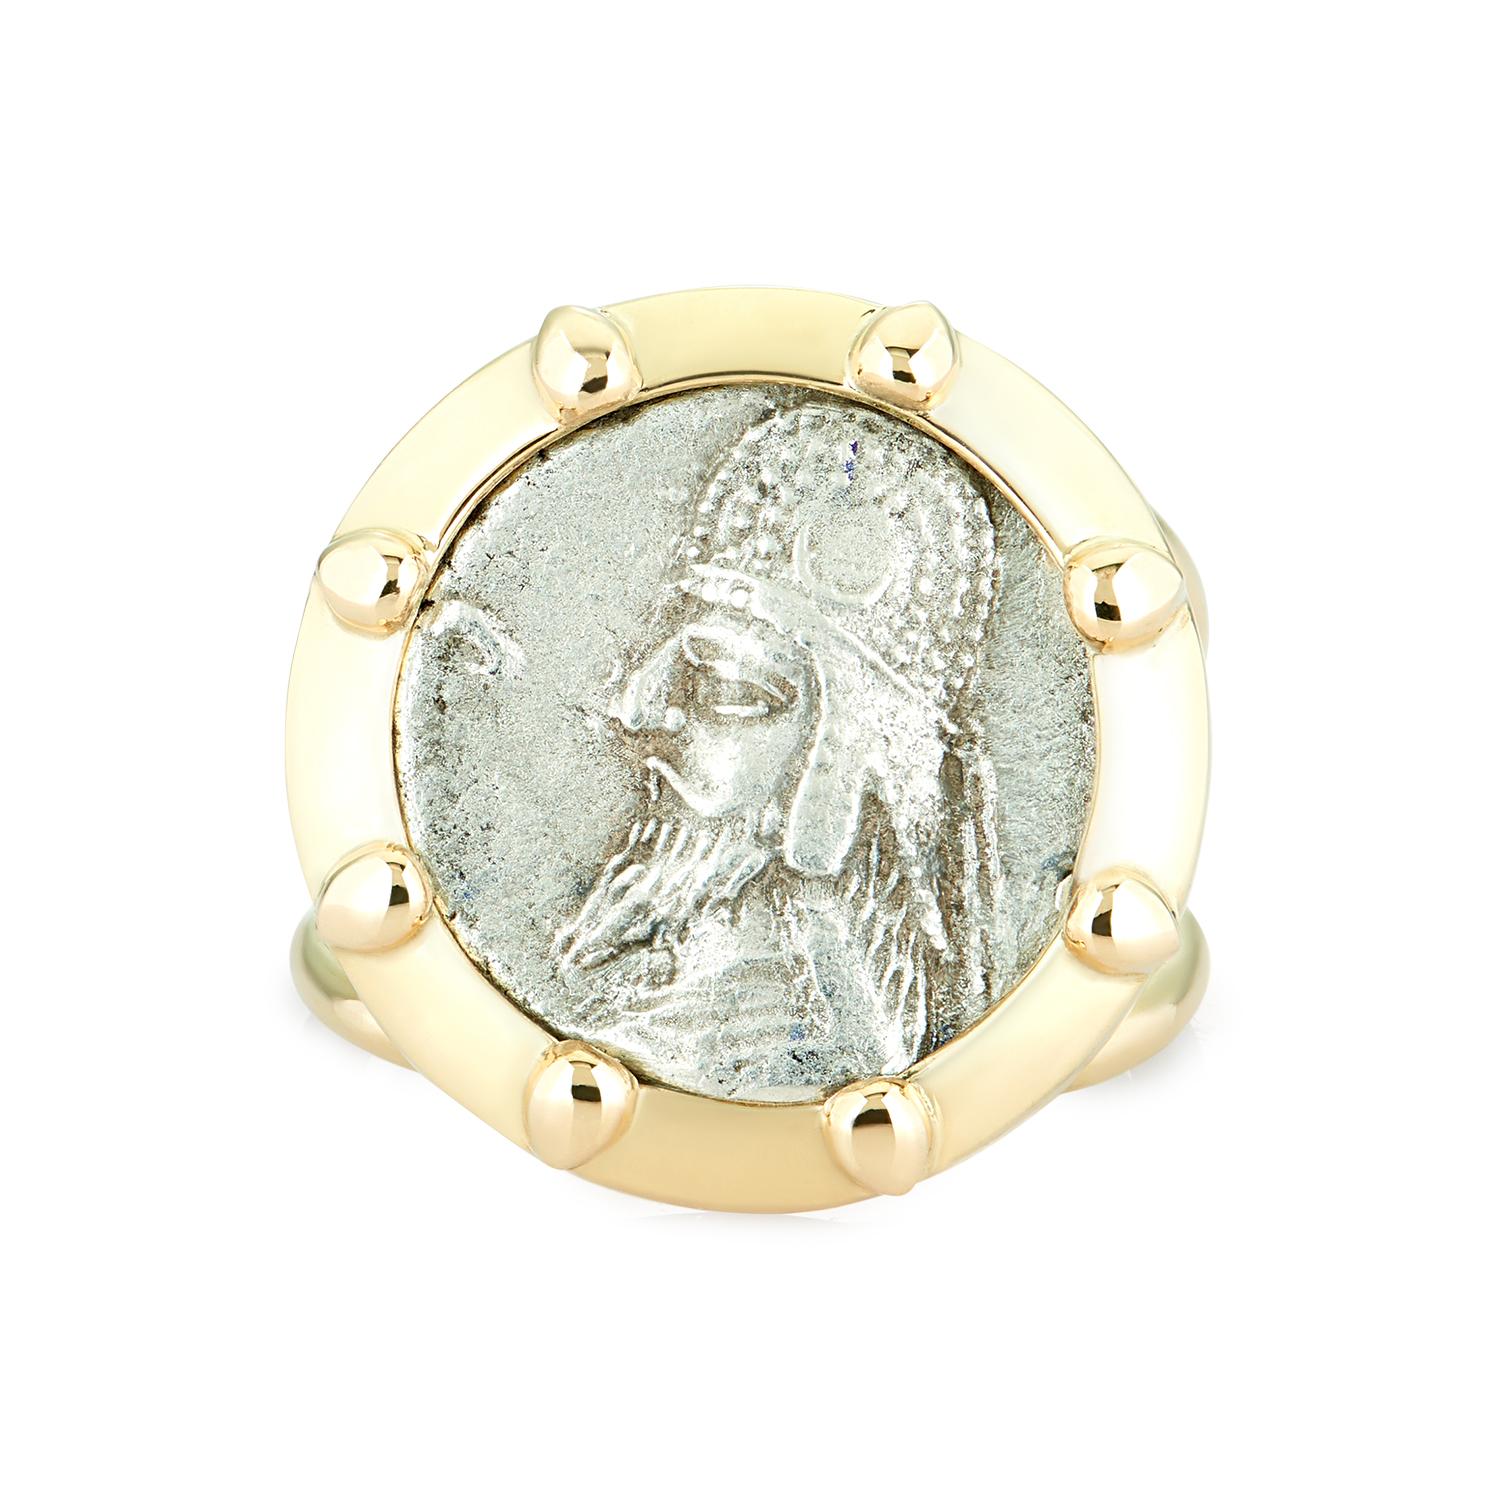 This unique DUBINI coin ring from the 'Empires' collection features an authentic silver persian coin minted circa 123-88 B.C. set in 18kt yellow gold.

This ring may be ordered with a lead time of 4-5 weeks.

*Due to the unique process of hand